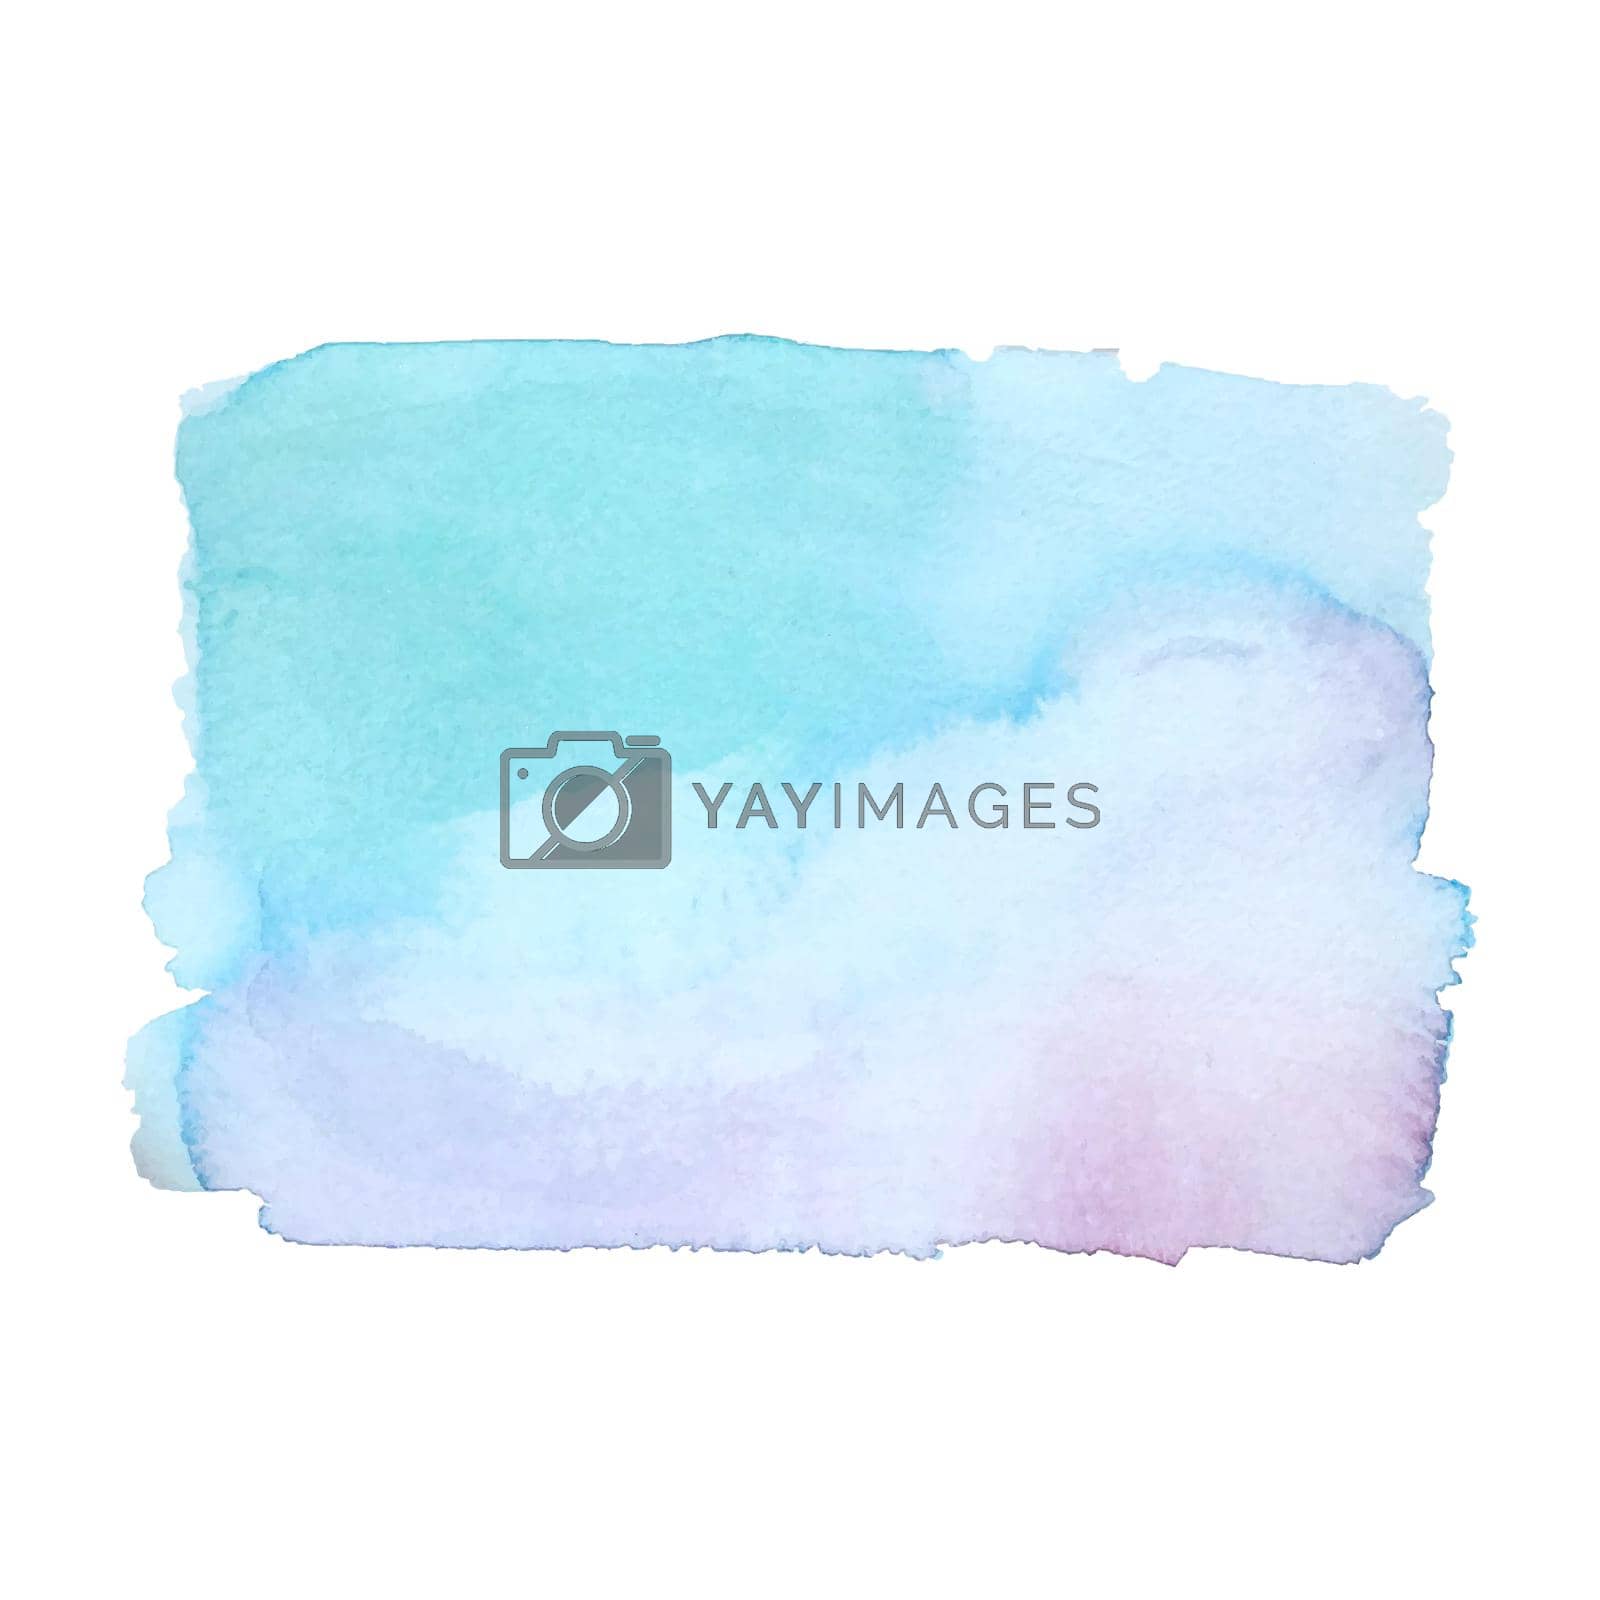 Royalty free image of Watercolor background backdrop abstract gentle pastel blue and pink by Margo